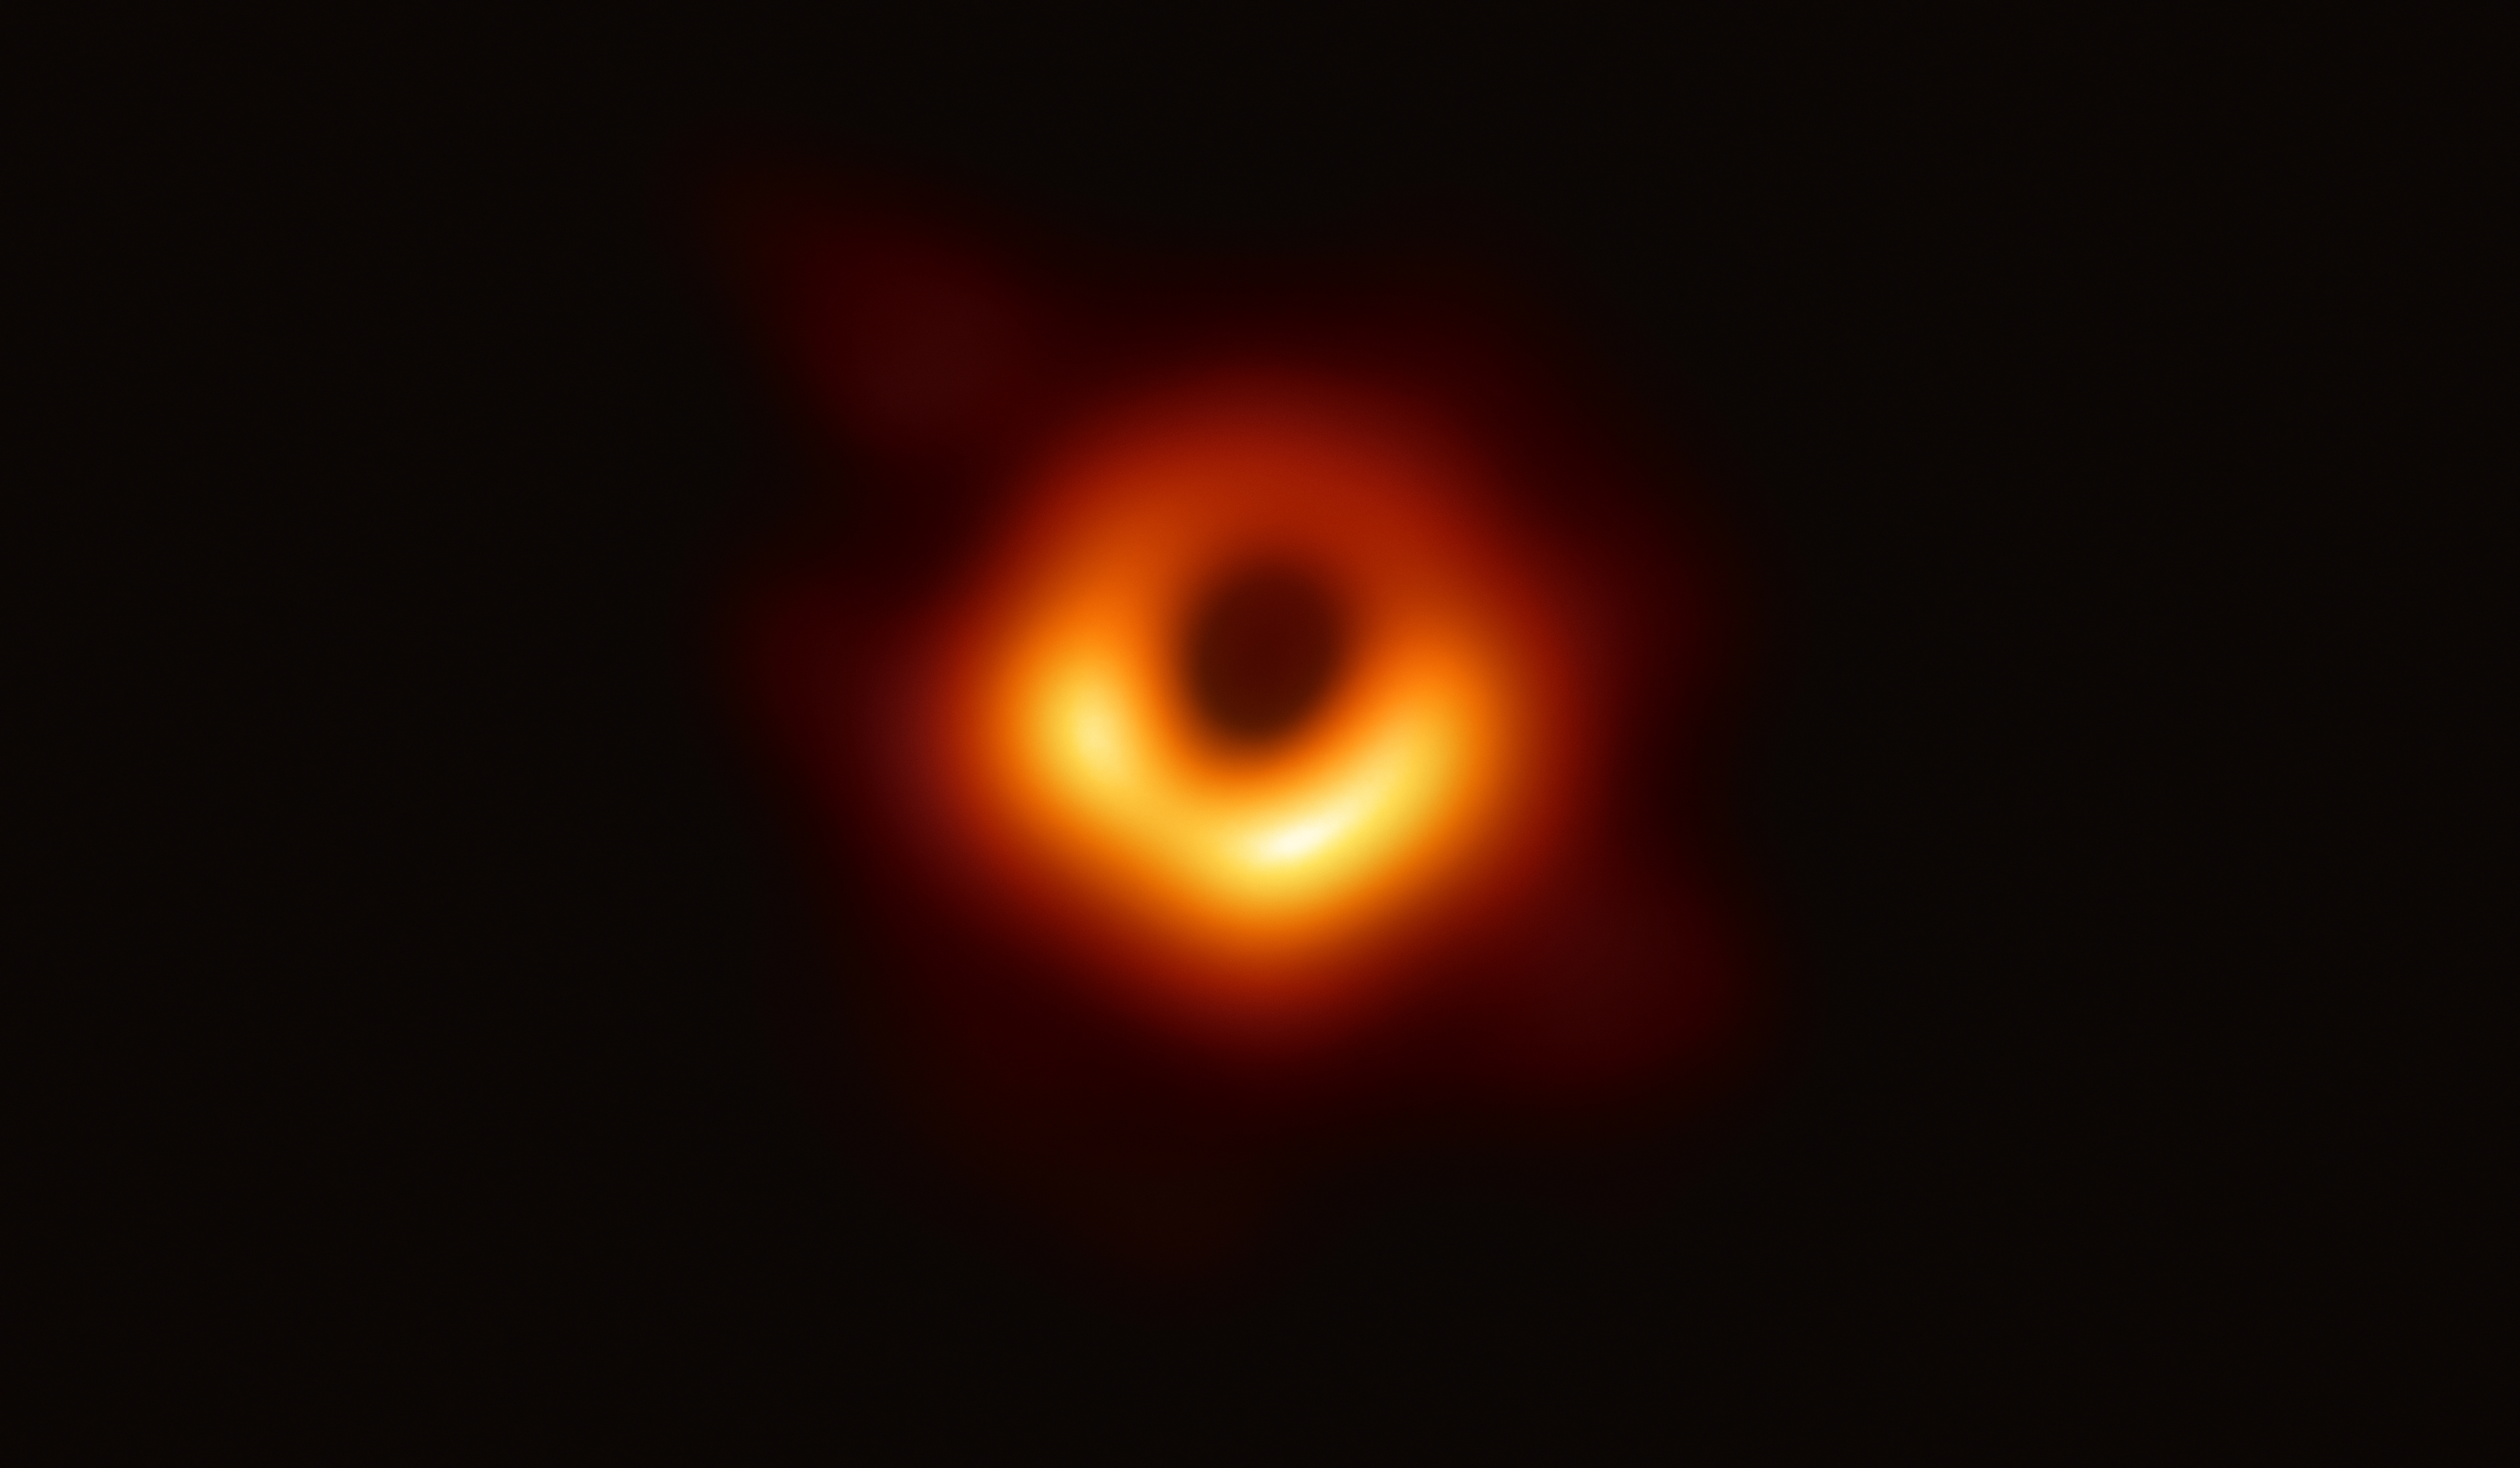 First Image of a Black Hole - Messier 87 by Event Horizon Telescope